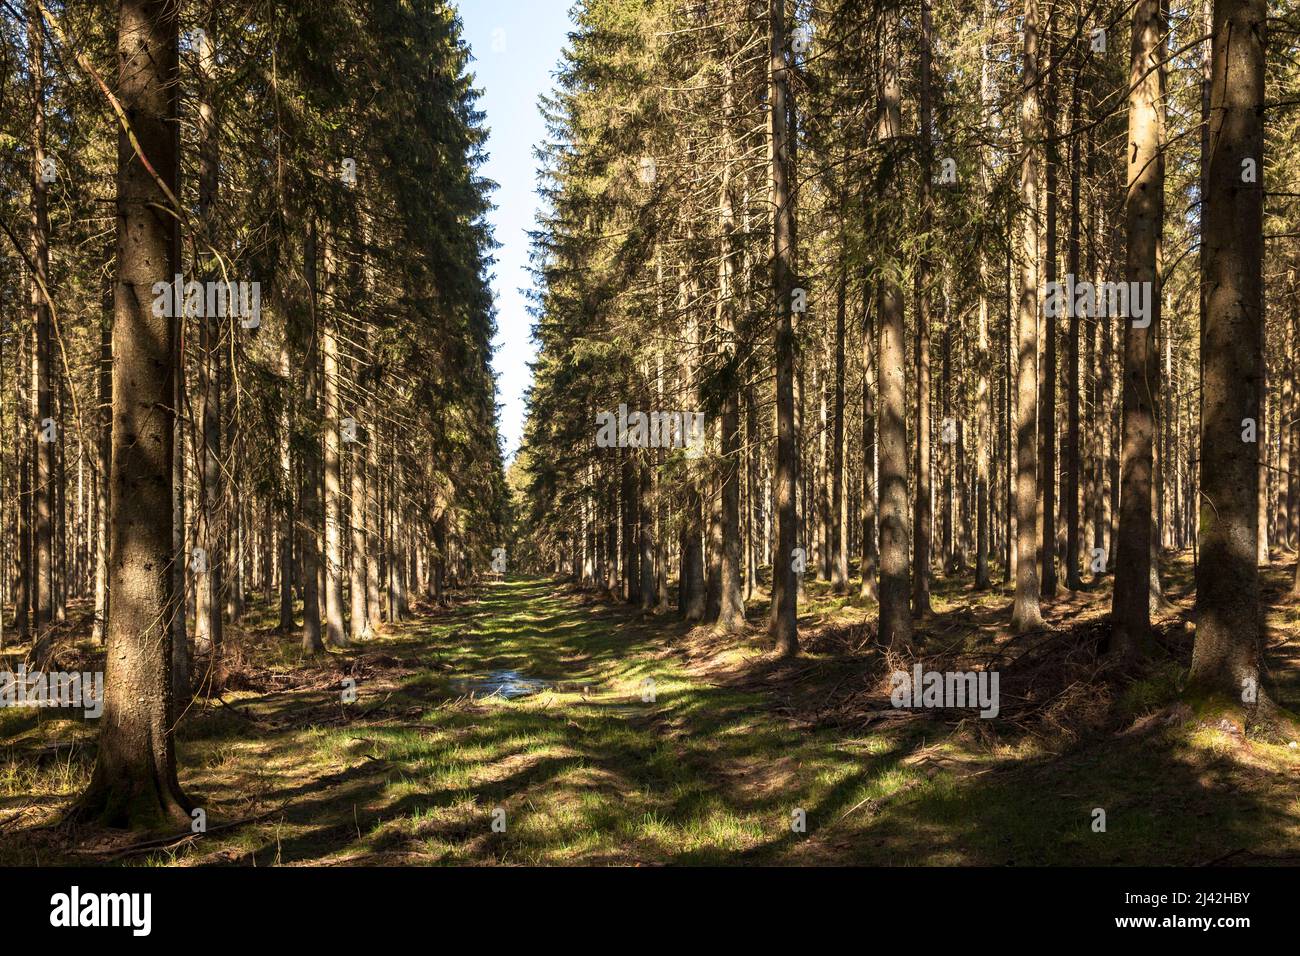 in this forest near Hellenthal-Hollerath the German Battle of the Bulge started on December 16, 1944, Eifel region, North Rhine-Westphalia, Germany. Stock Photo